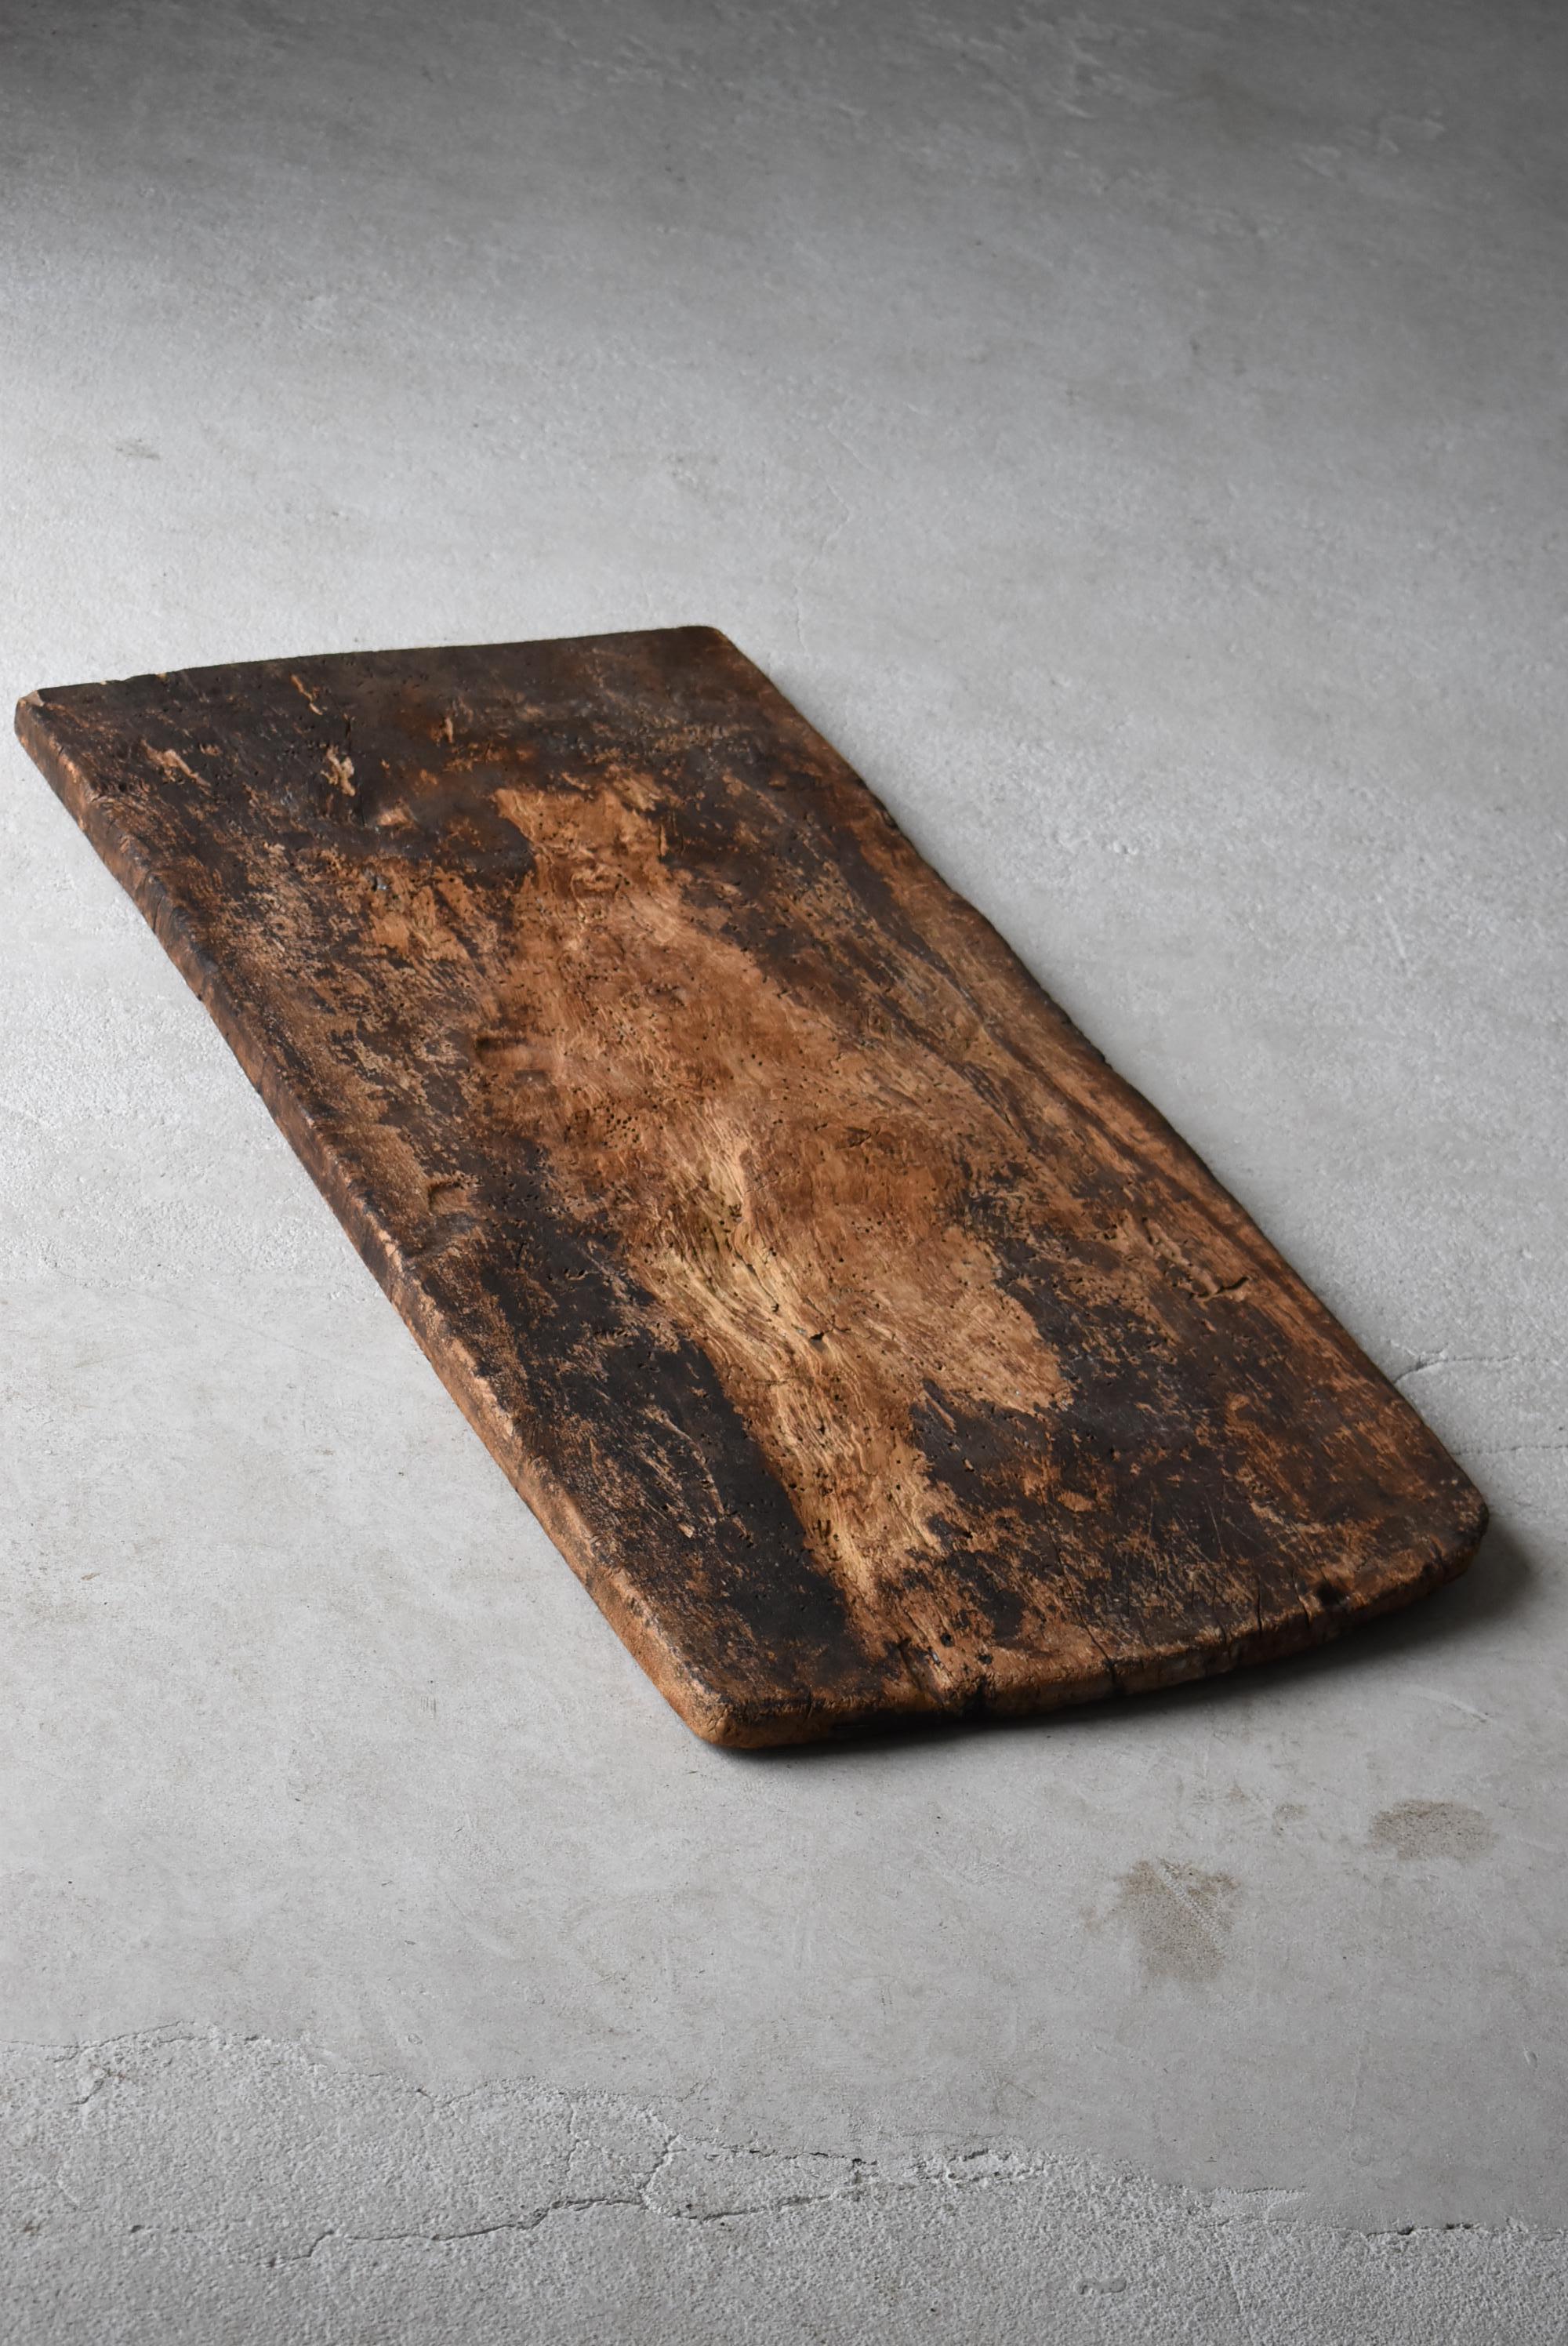 It is a board used by Japanese farmers from the Meiji era to the early Showa era (around 1868-1920).
Japanese farmers used this type of board to knead rice cakes and udon noodles.

Besides, such a board was used when cutting vegetables and doing